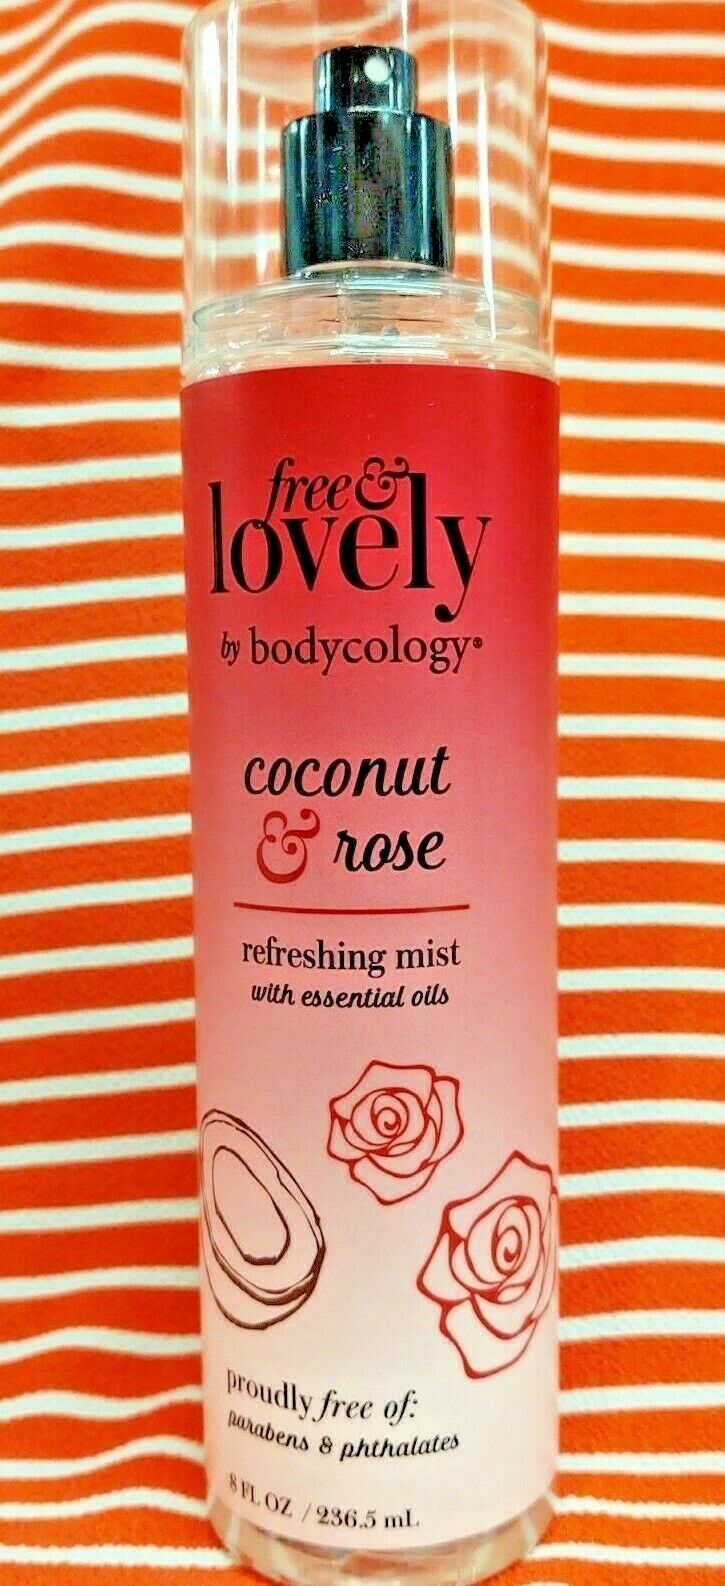 Primary image for Free & Lovely by Bodycology COCONUT & ROSE Refreshing Mist Body Spray 8 oz NEW!!